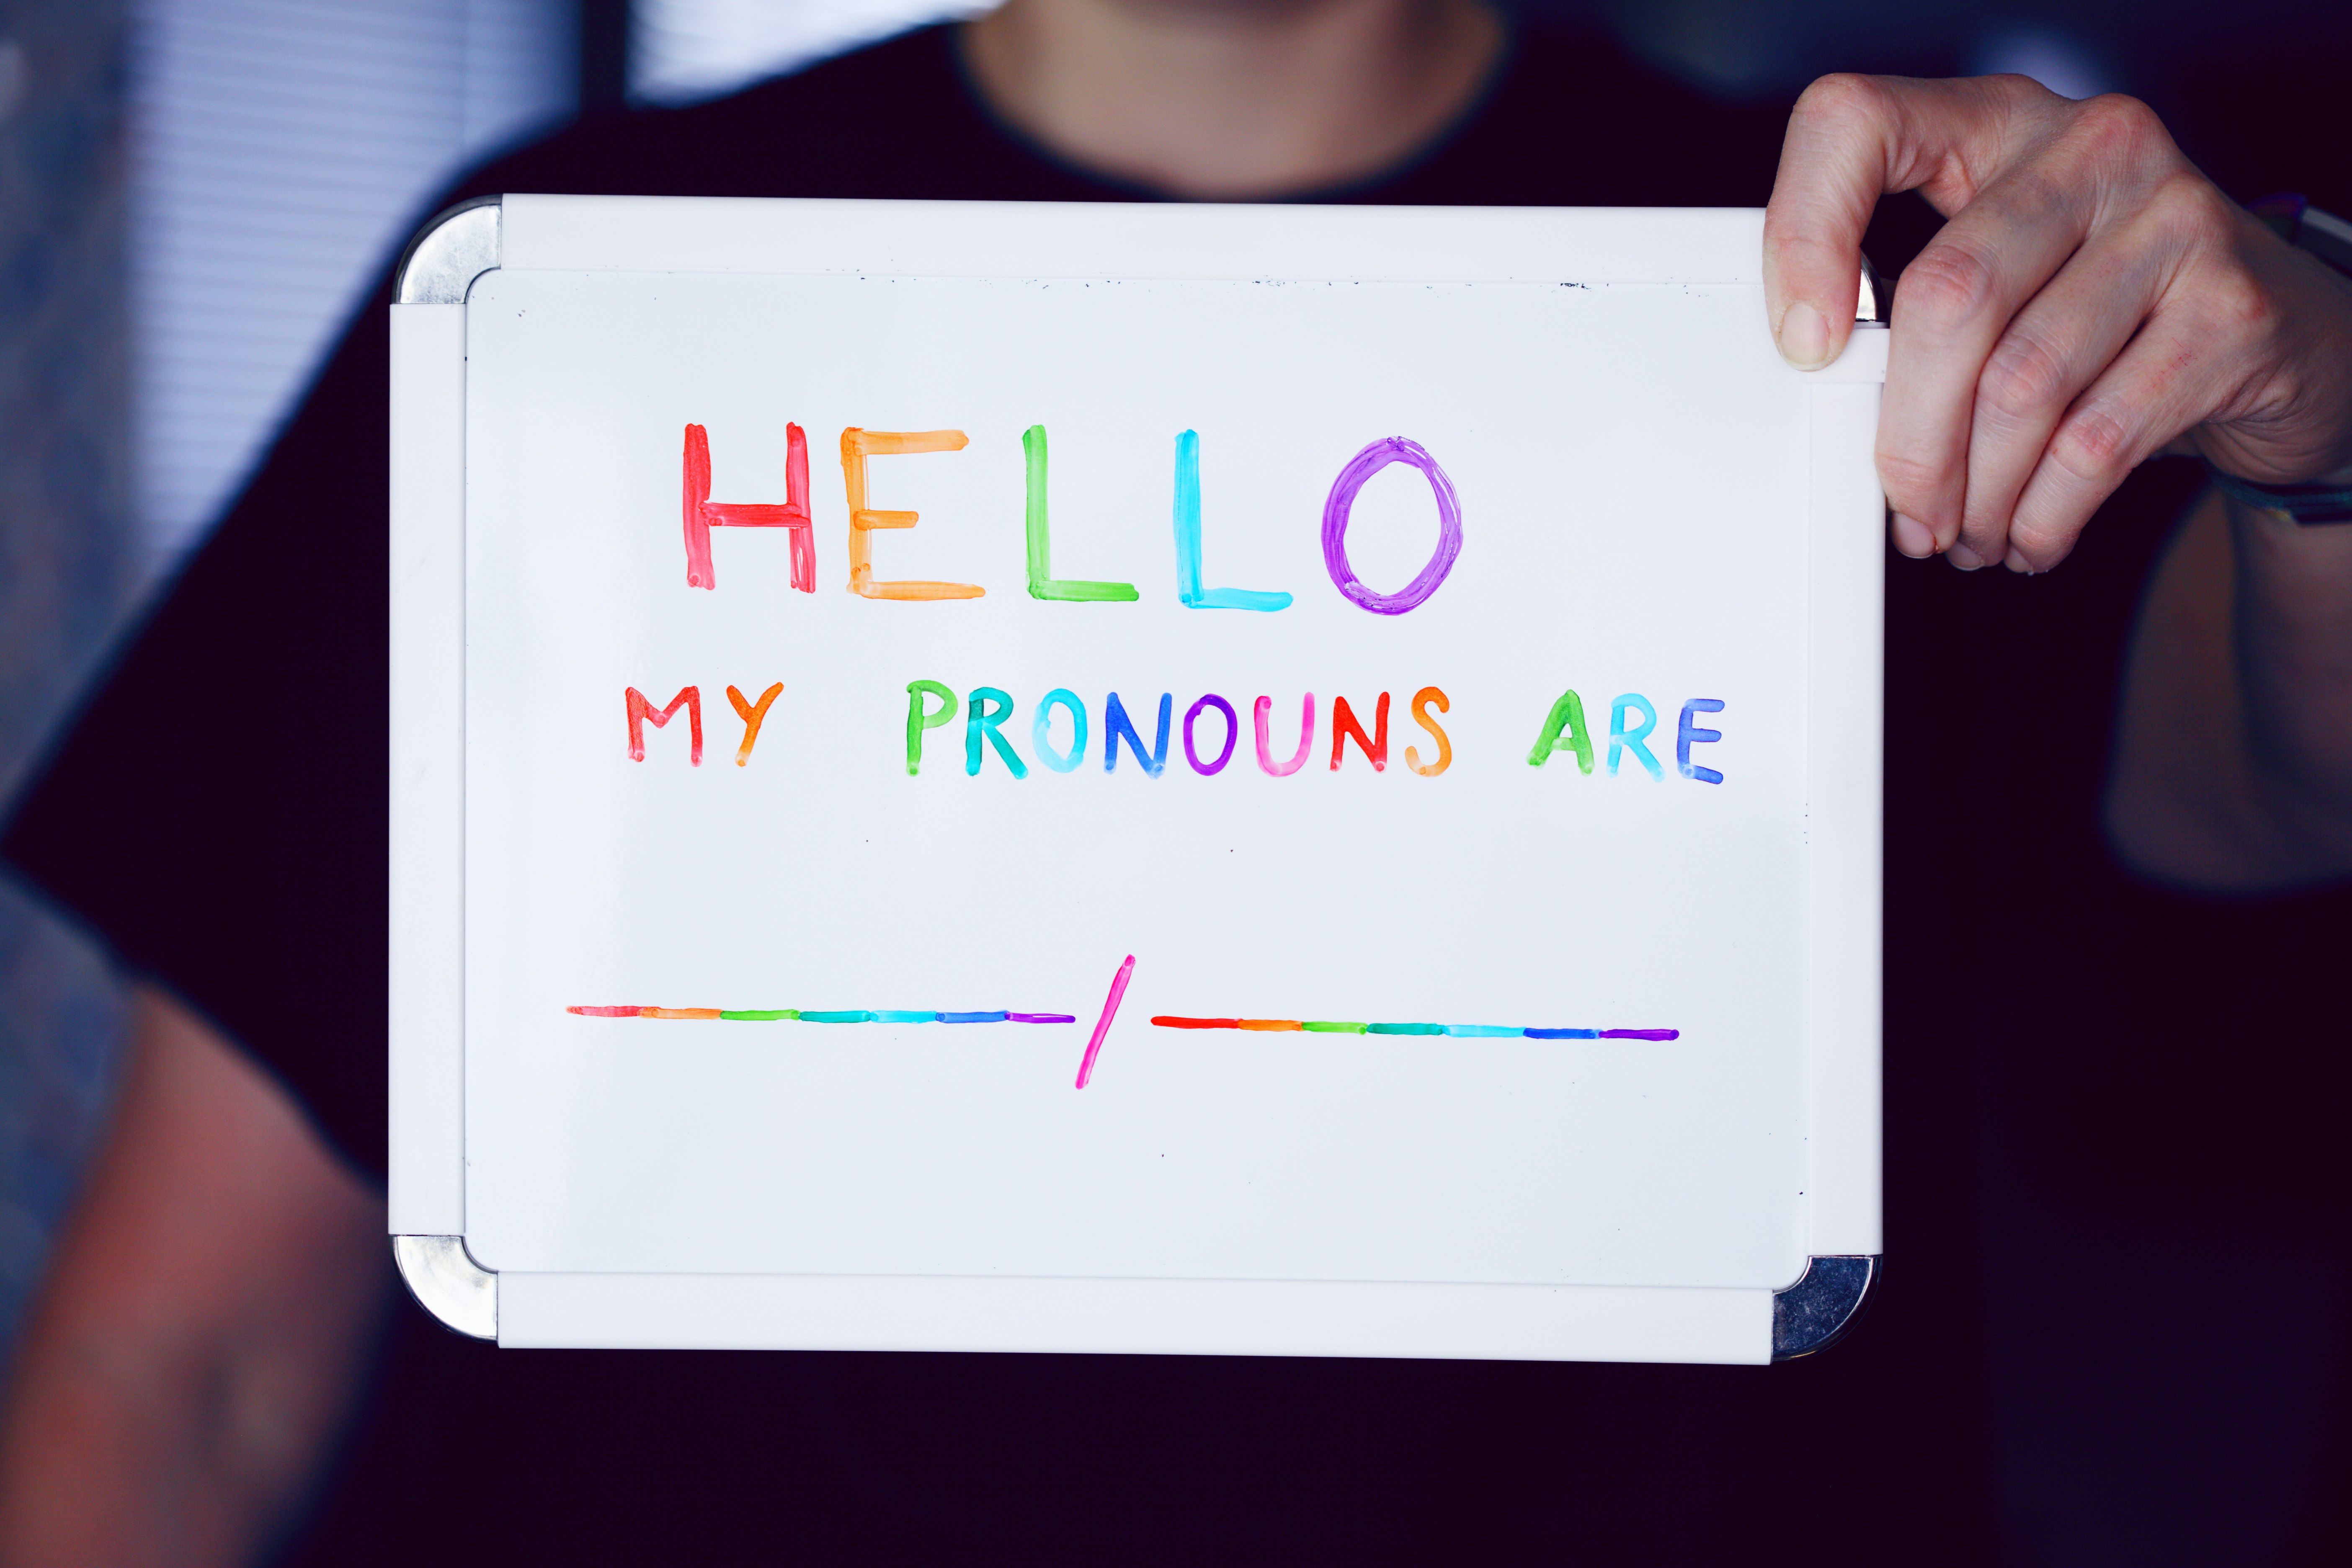 Pronouns matter. Pronouns are important. Everyone is valid. She/Her, He/Him, They/Them, Ze/Zim, and many more. Don't be afraid to ask which pronouns someone may prefer. 